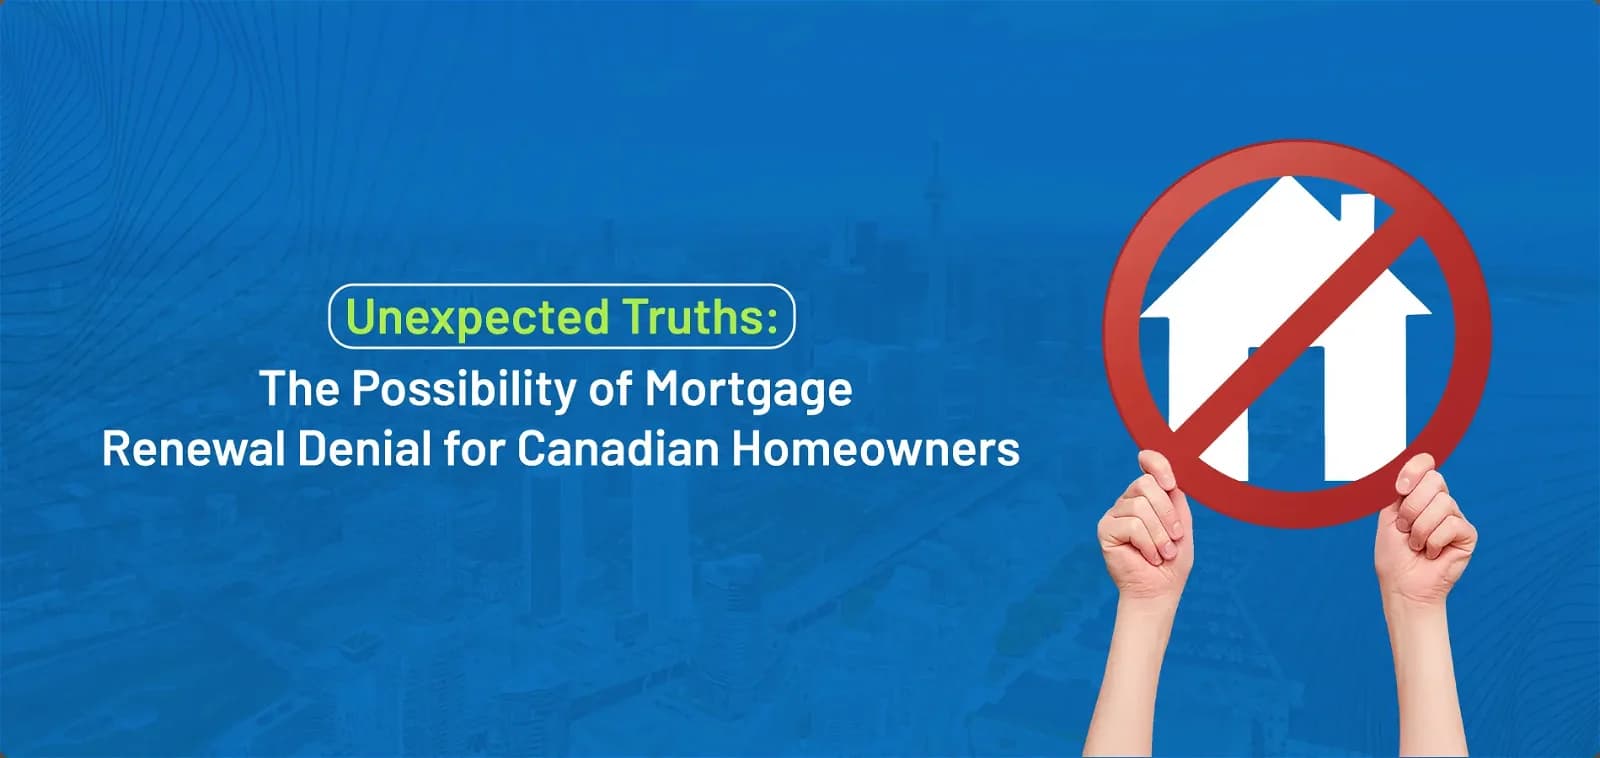 Unexpected Truths: The Possibility of Mortgage Renewal Denial for Canadian Homeowners